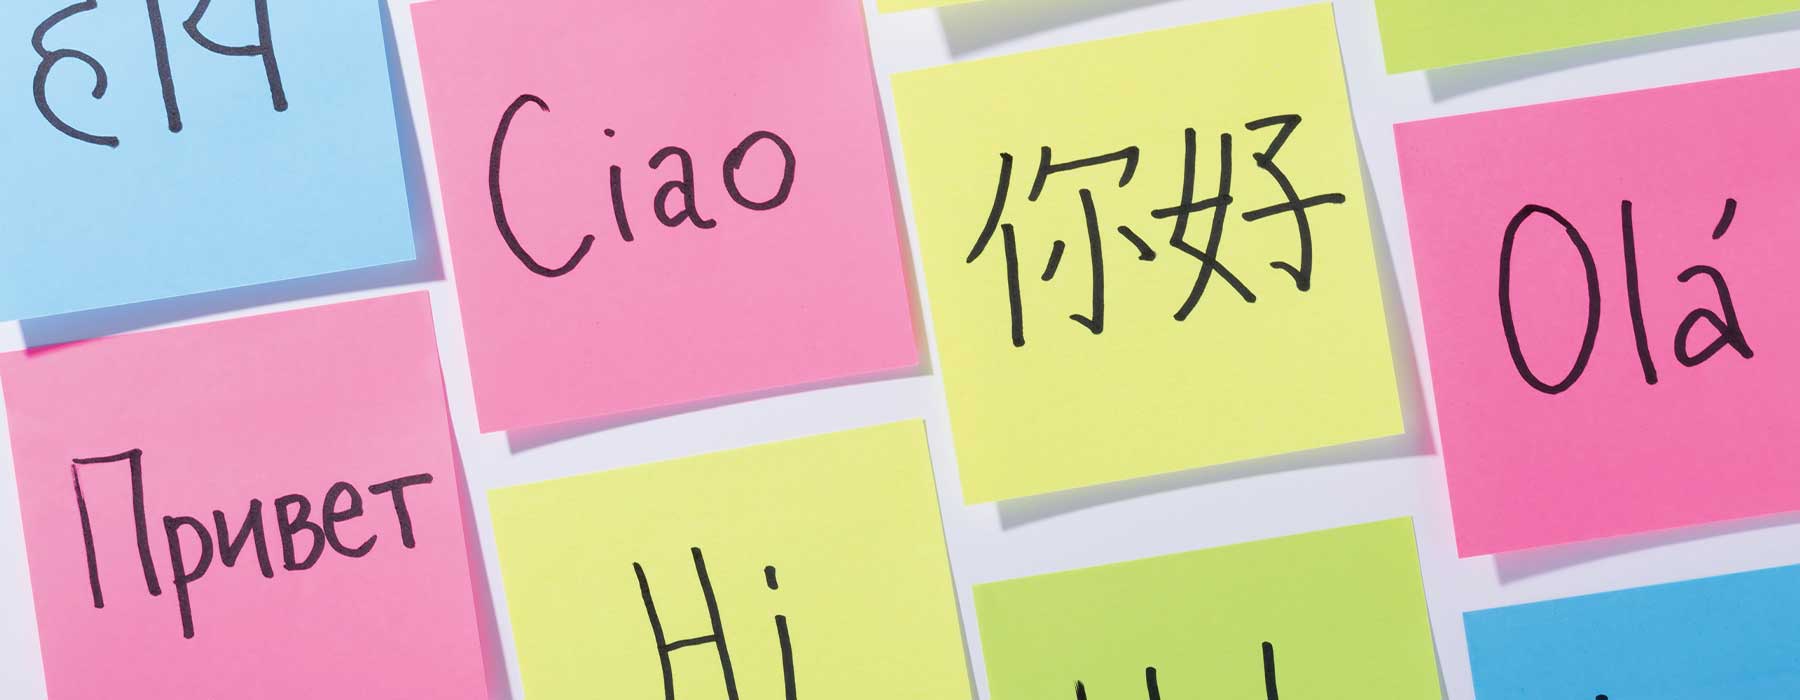 sticky notes with hello written in several languages